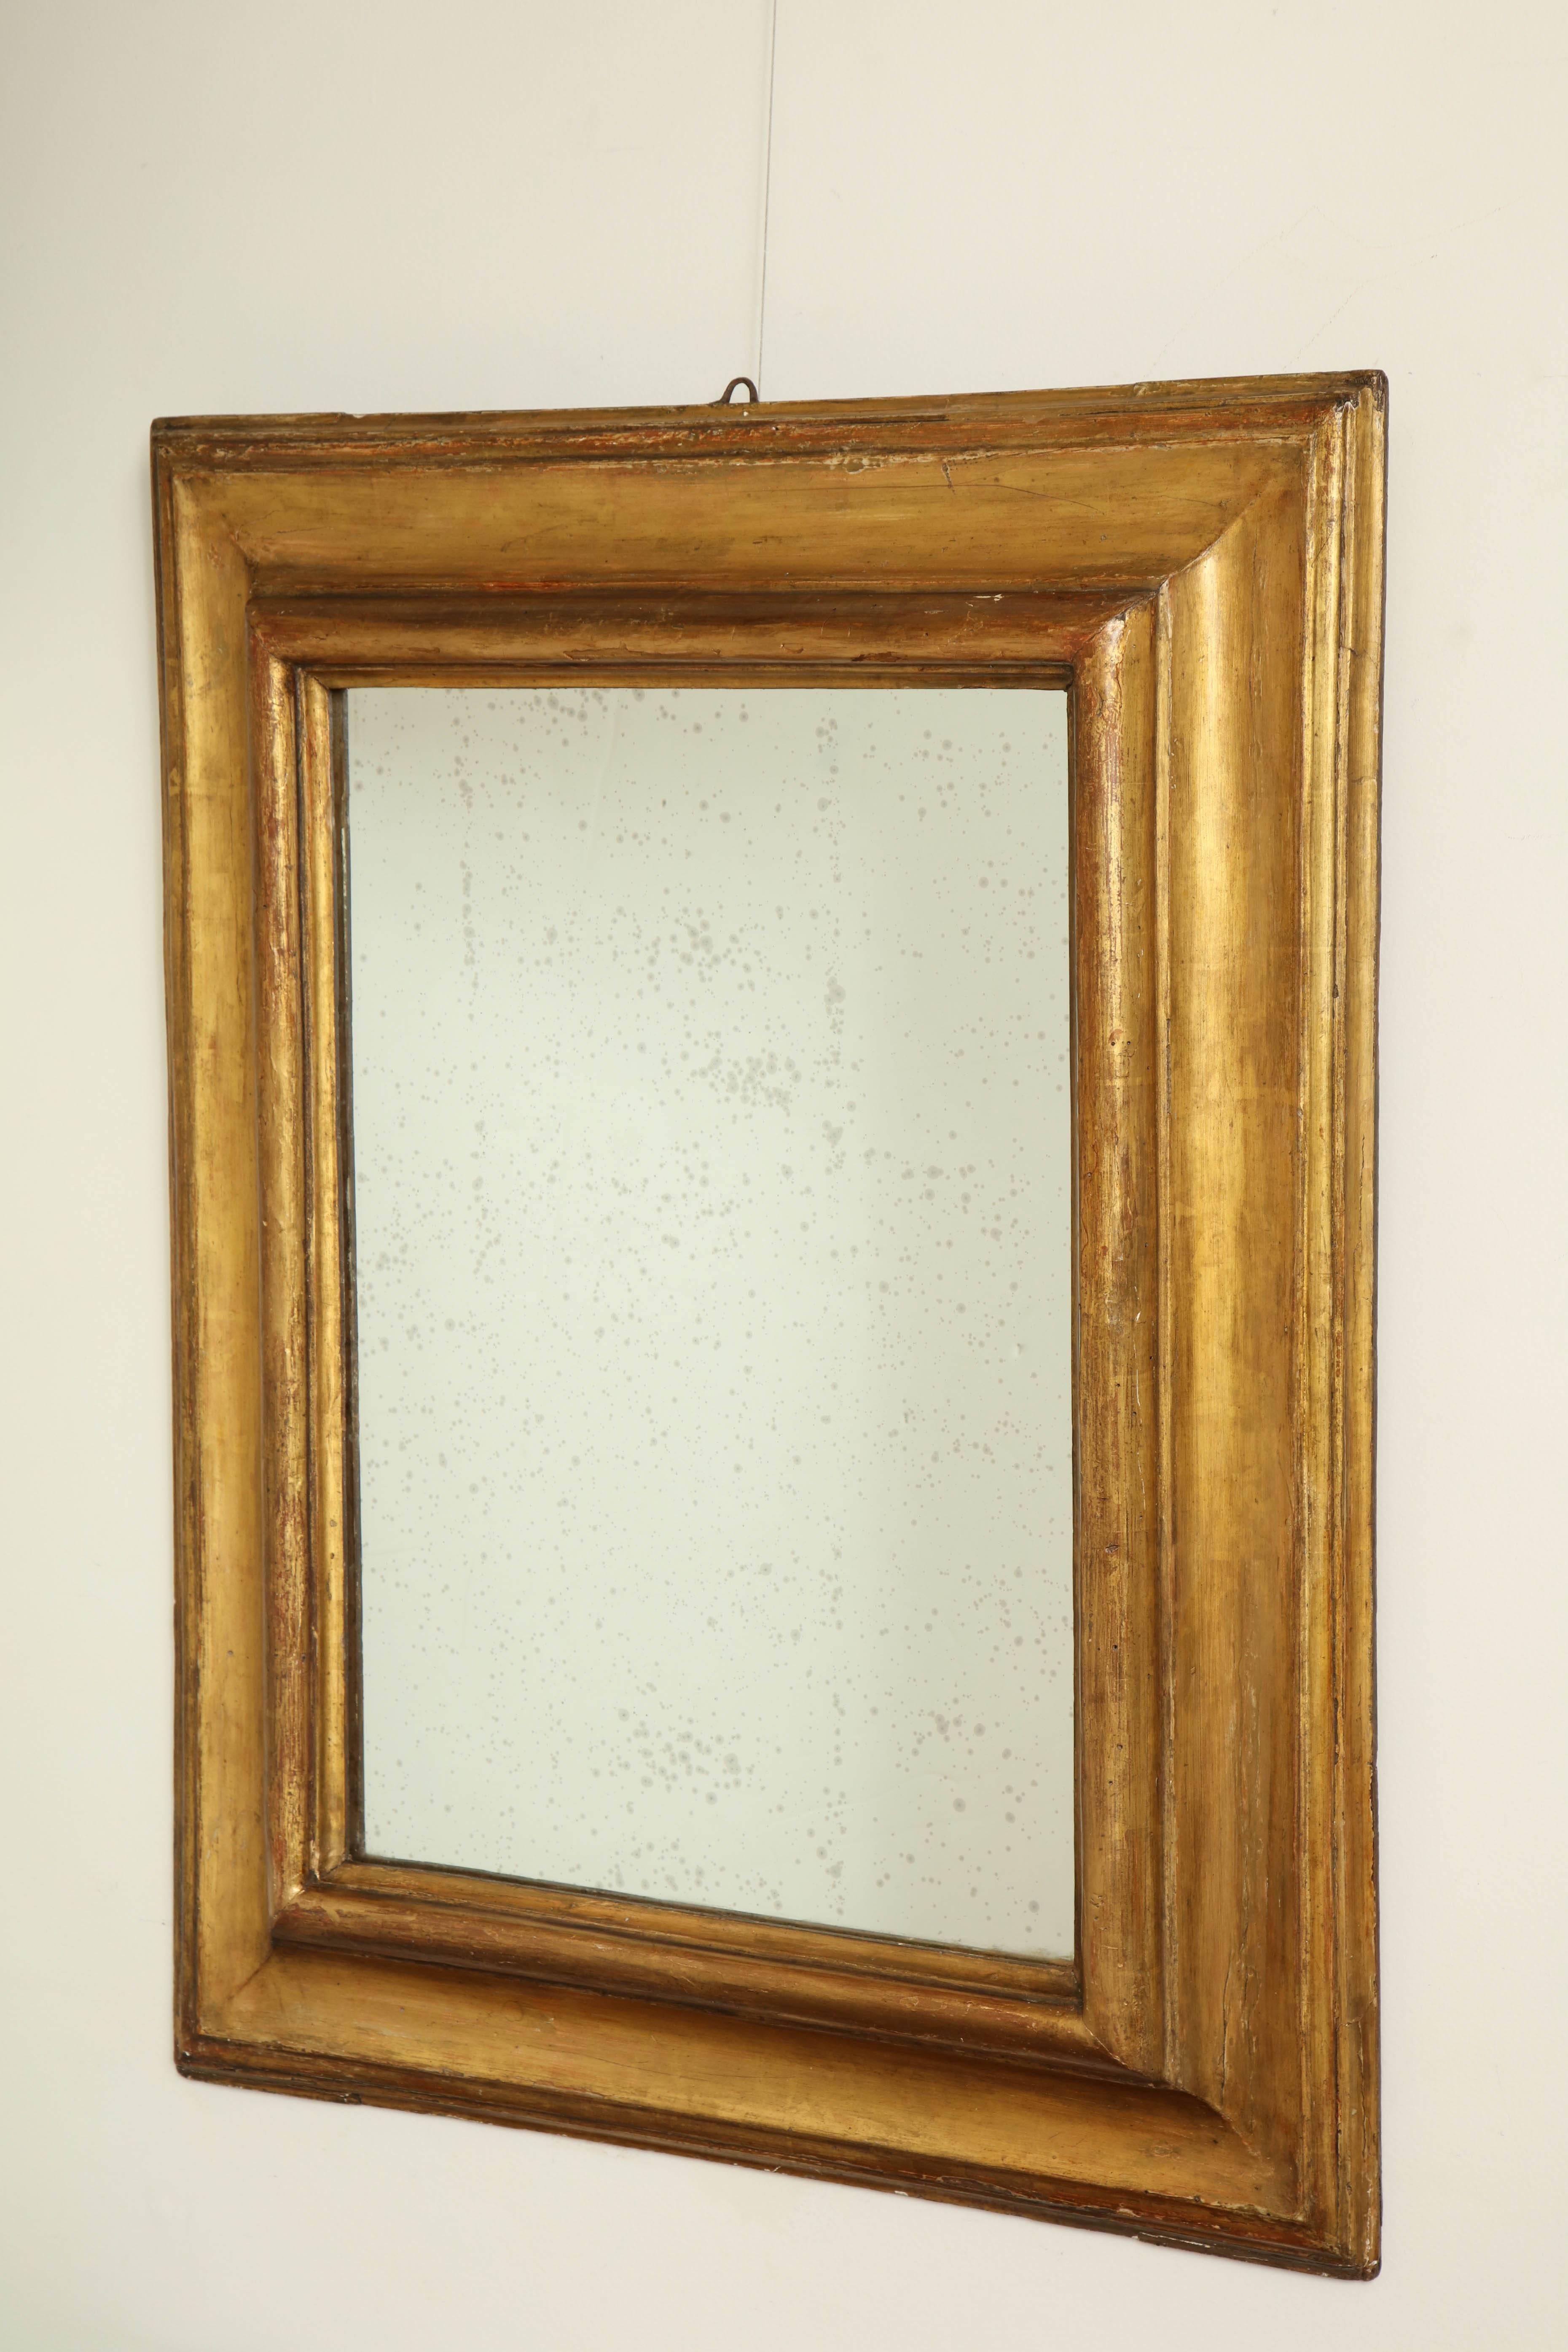 Rectangular molded giltwood wall mirror with antiqued mirror glass, Italy, circa 17th century.


Available to see in our NYC Showroom 
BK Antiques
306 East 61st St. 2nd fl.
New York, NY 10065